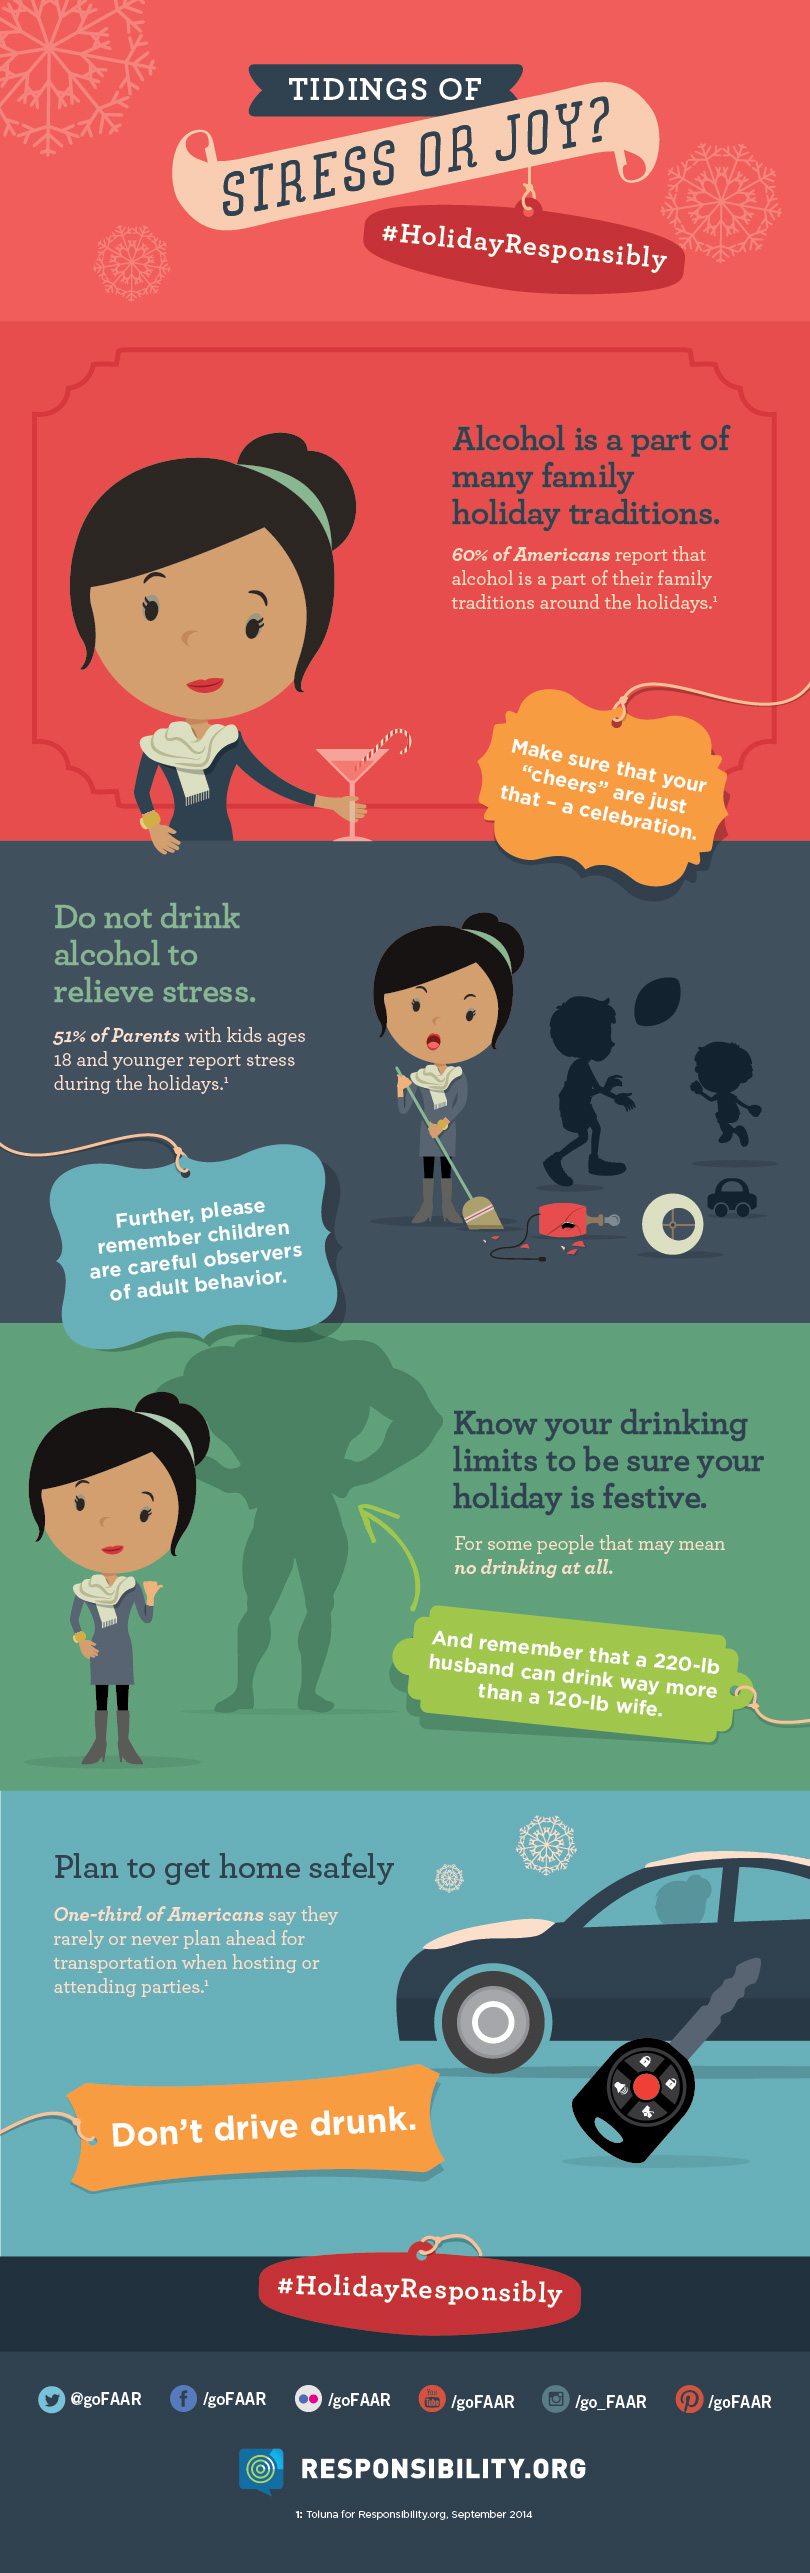 60% of Americans report that alcohol is a part of their family traditions around the holidays. With great tradition comes great responsibility.